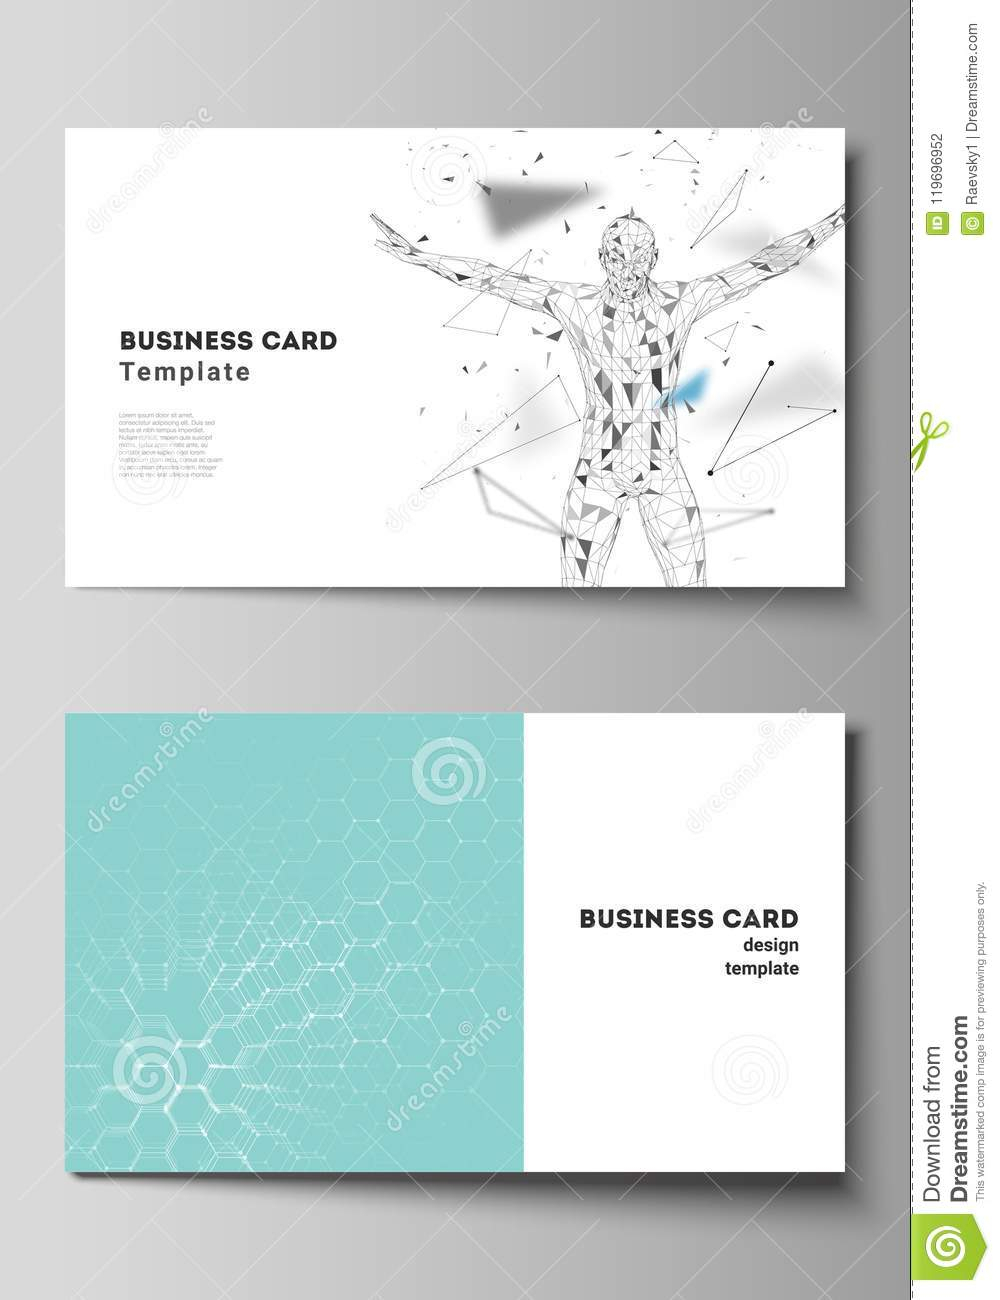 Vector Illustration Of The Editable Layout Of Two Creative For Medical Business Cards Templates Free